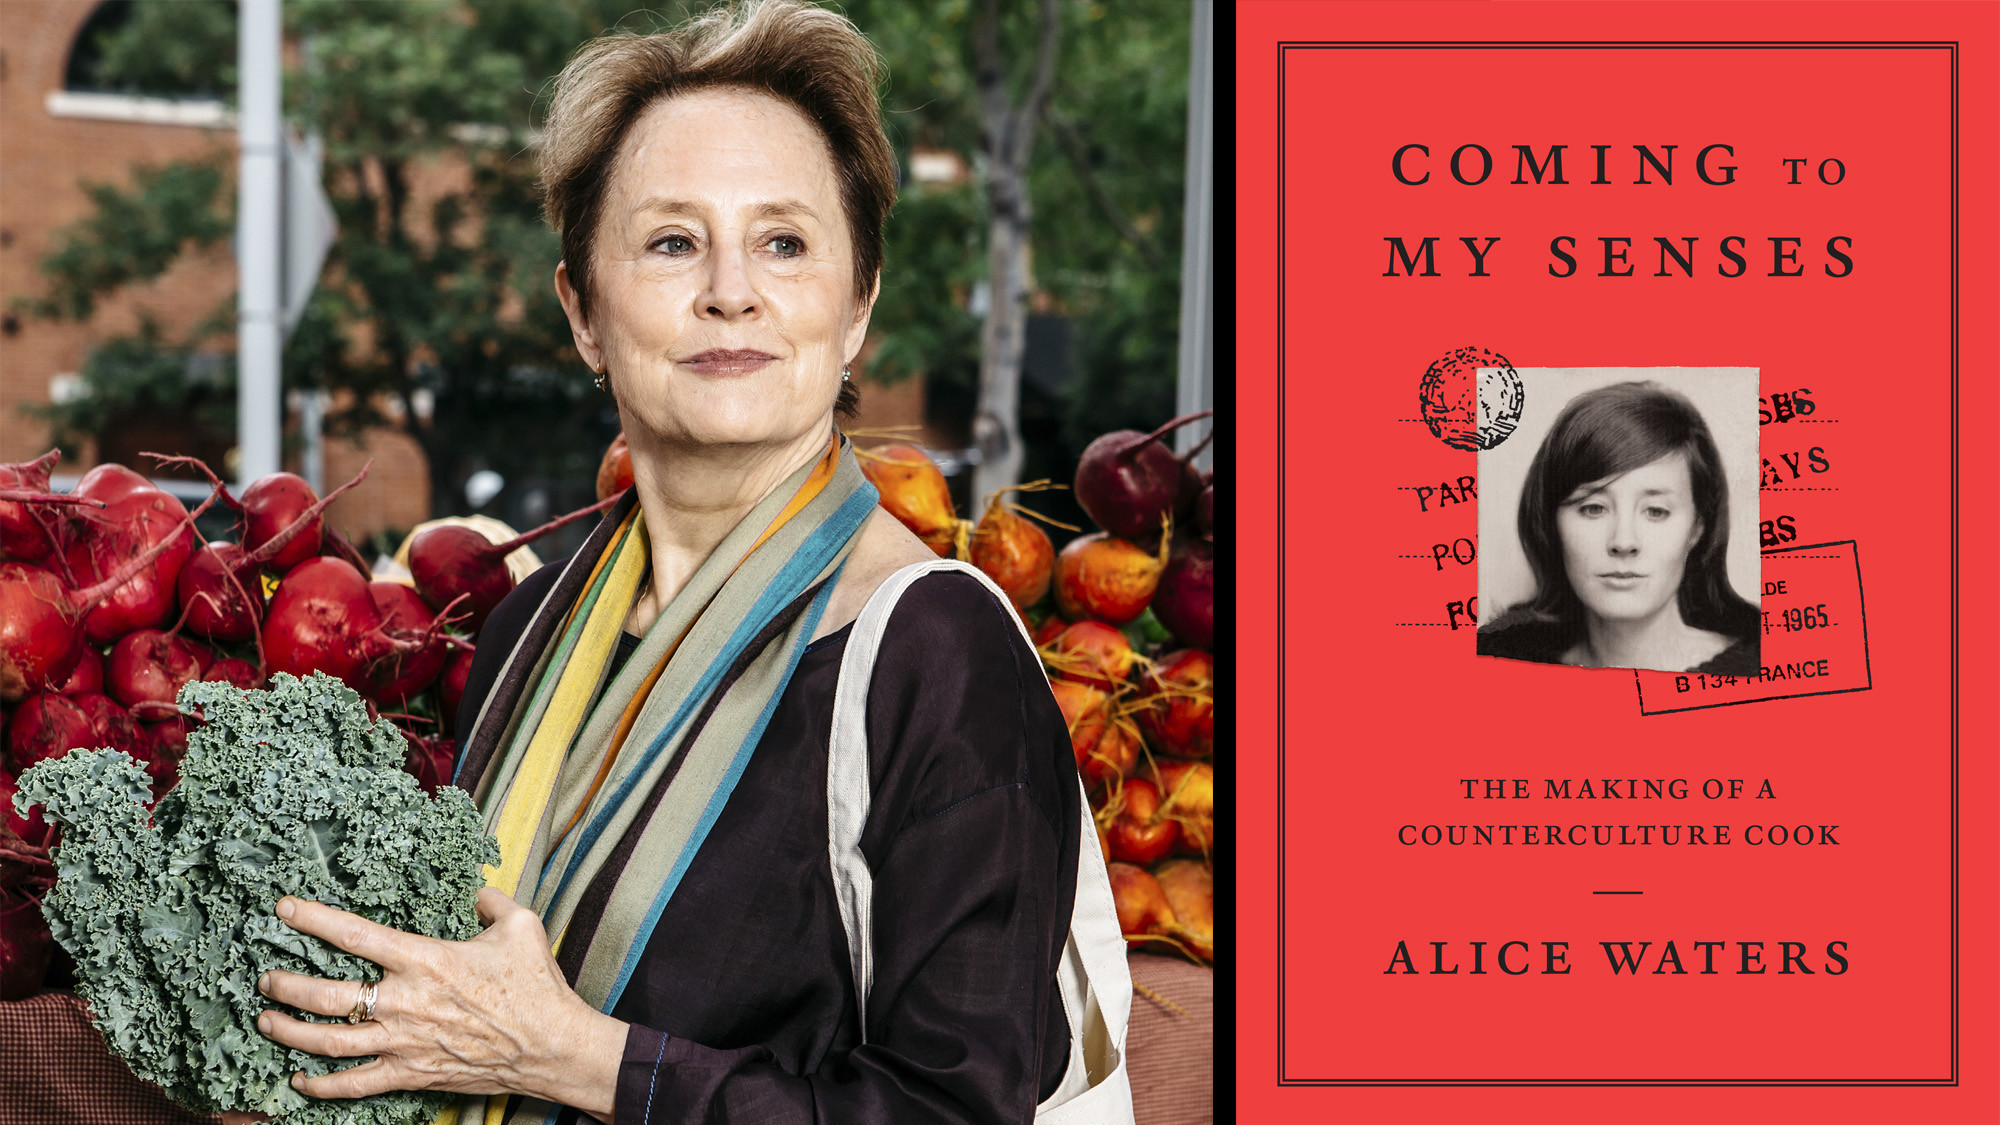 Coming to My Senses: The Making of a Counterculture Cook, by Alice Waters